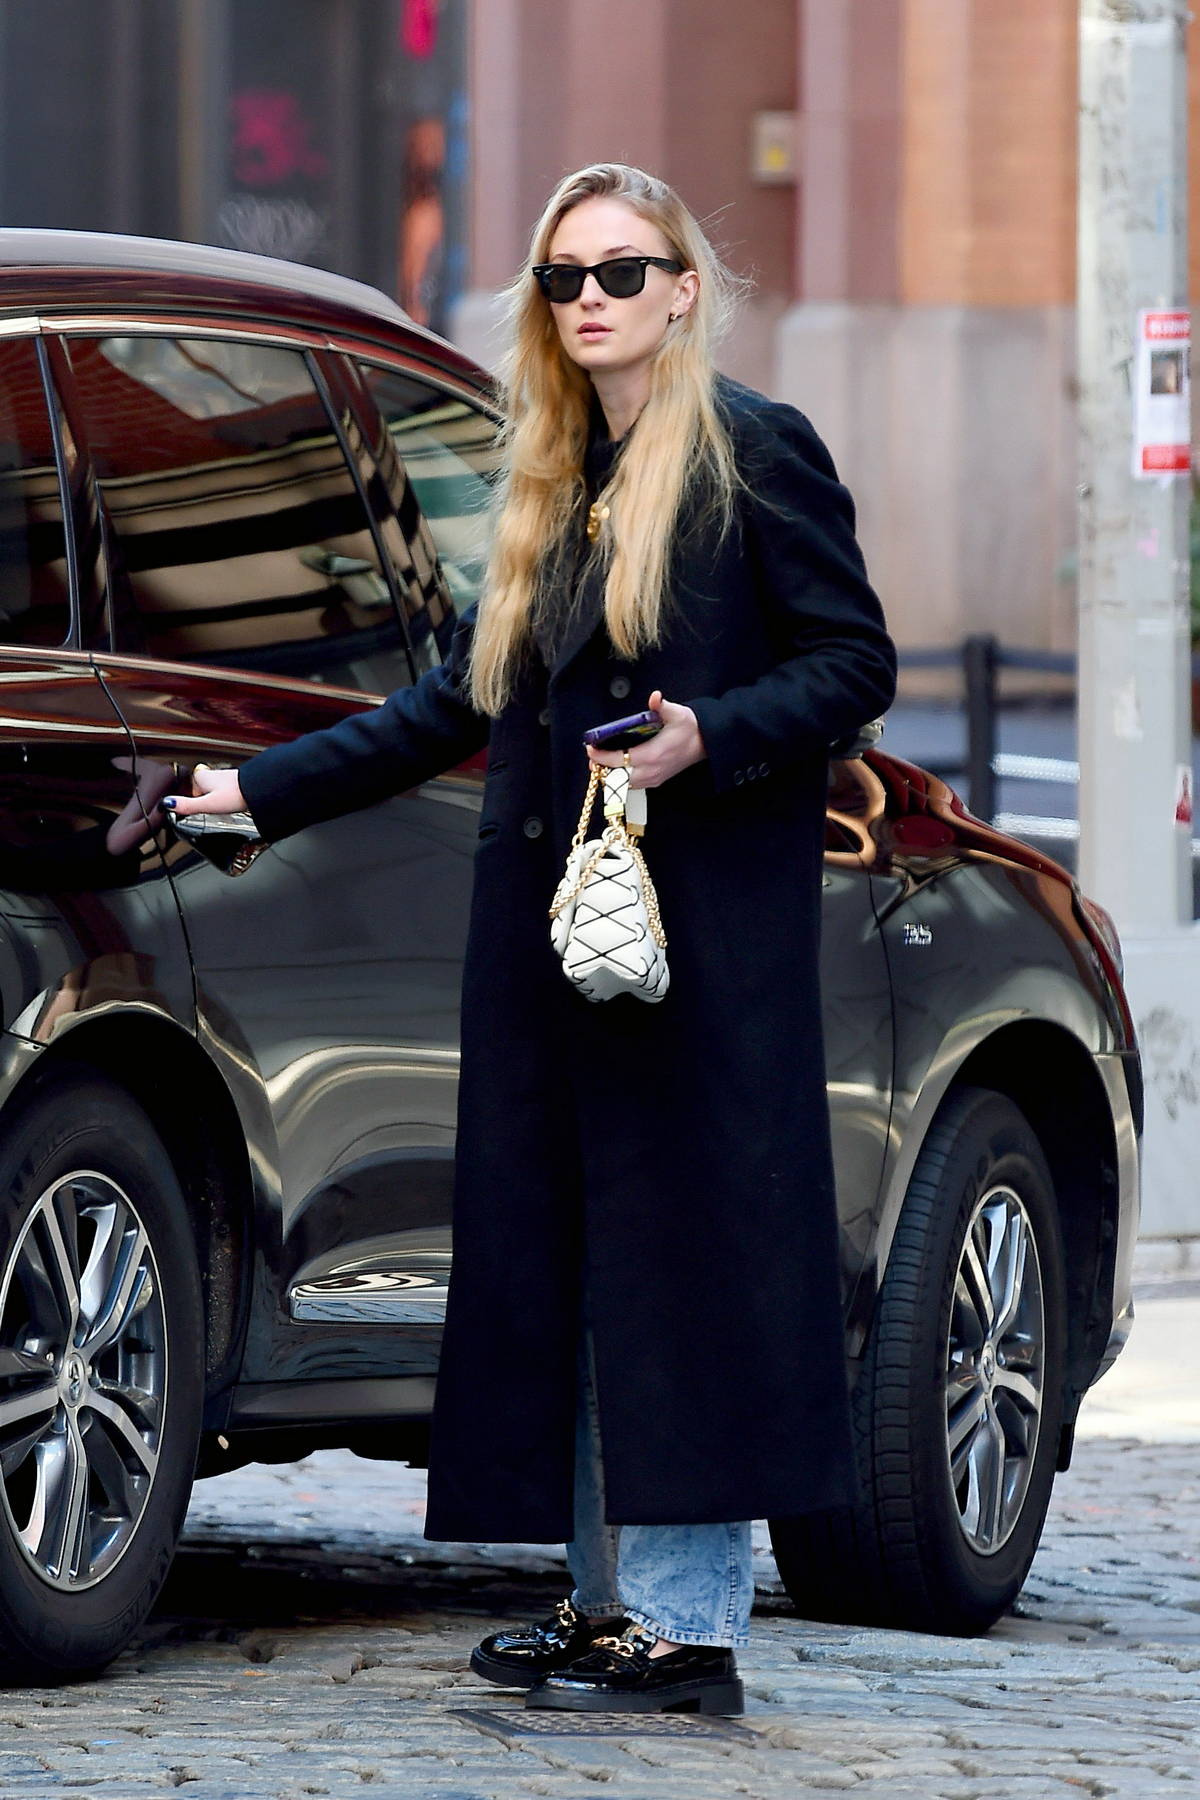 Sophie Turner wore a black trench coat, jeans and black loafers while out in New York City